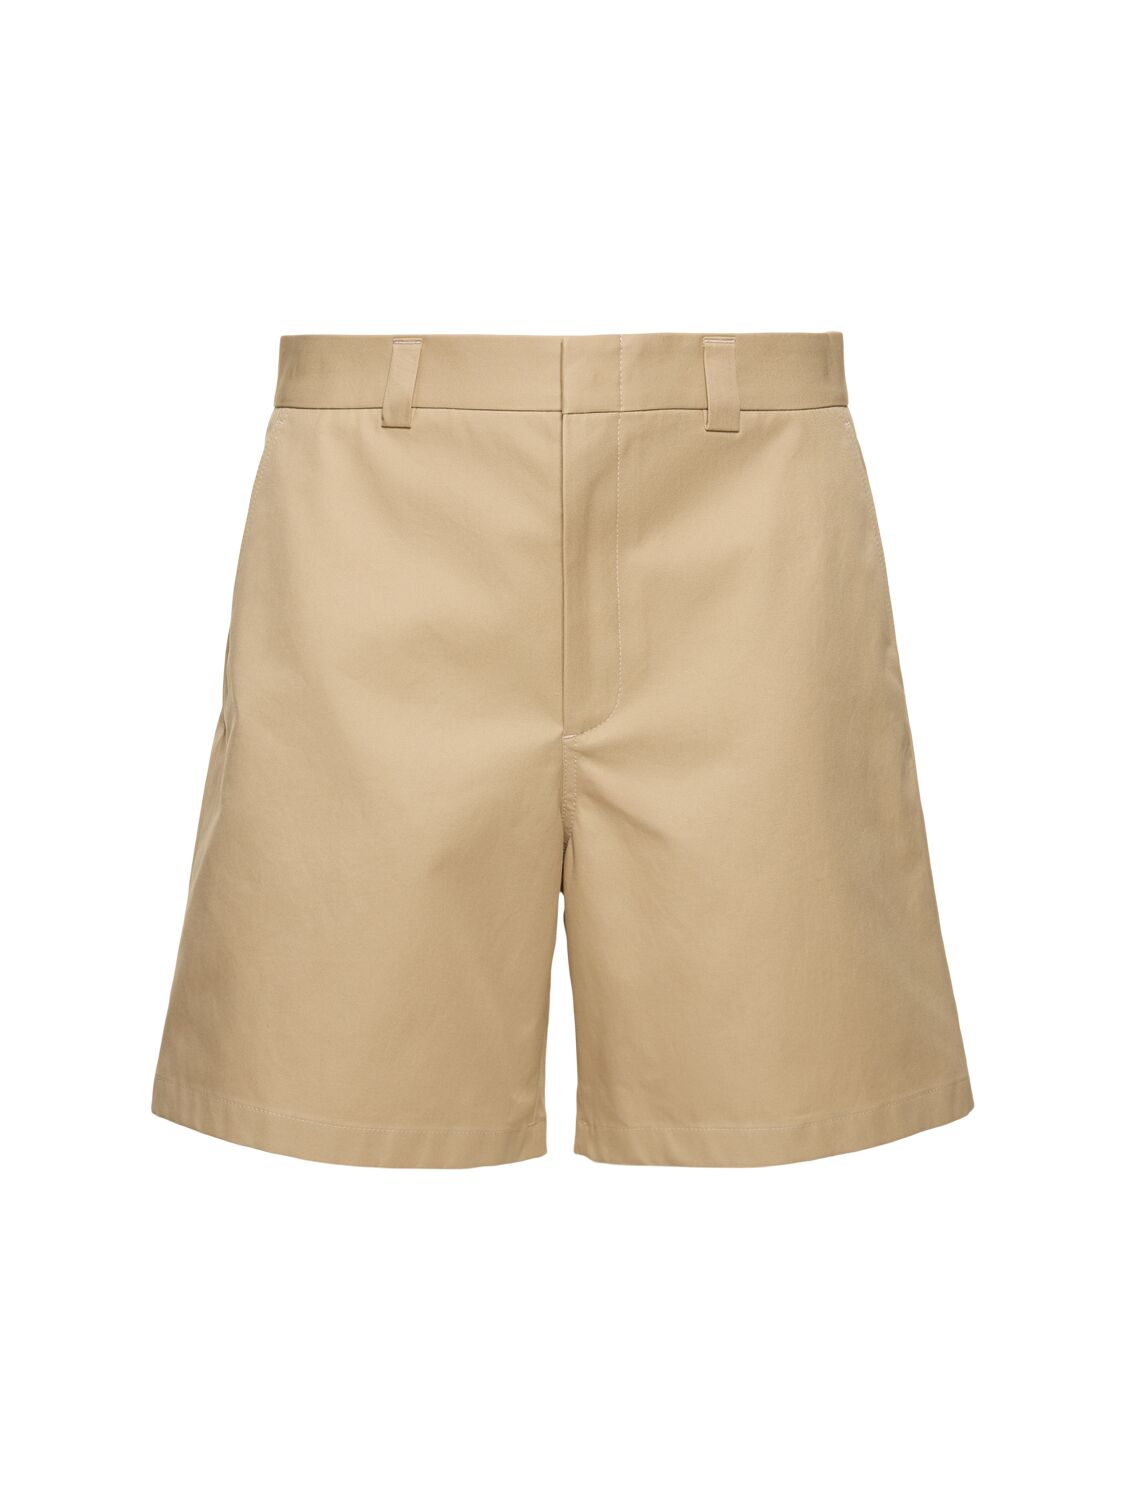 Image of Compact Cotton Twill Shorts